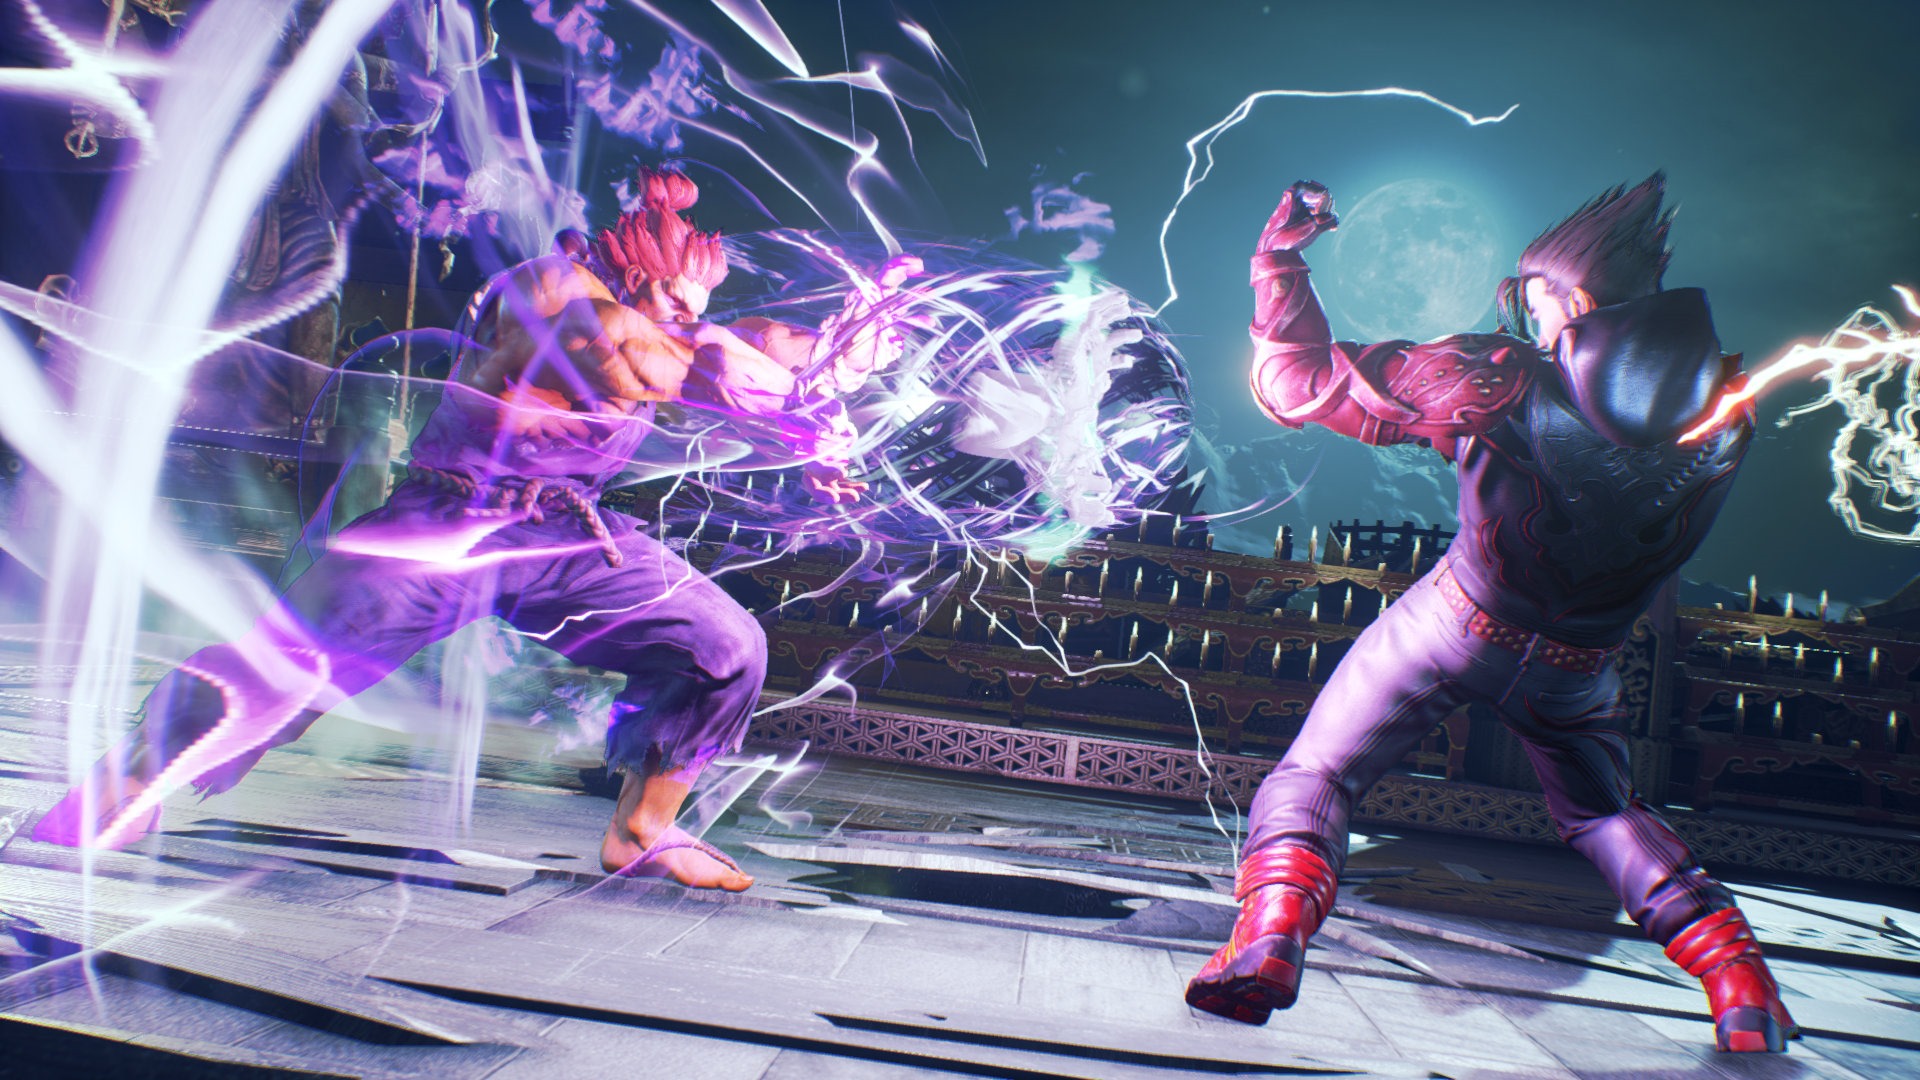 Street Fighter 5 input latency put to the test between PlayStation 5 and PS4